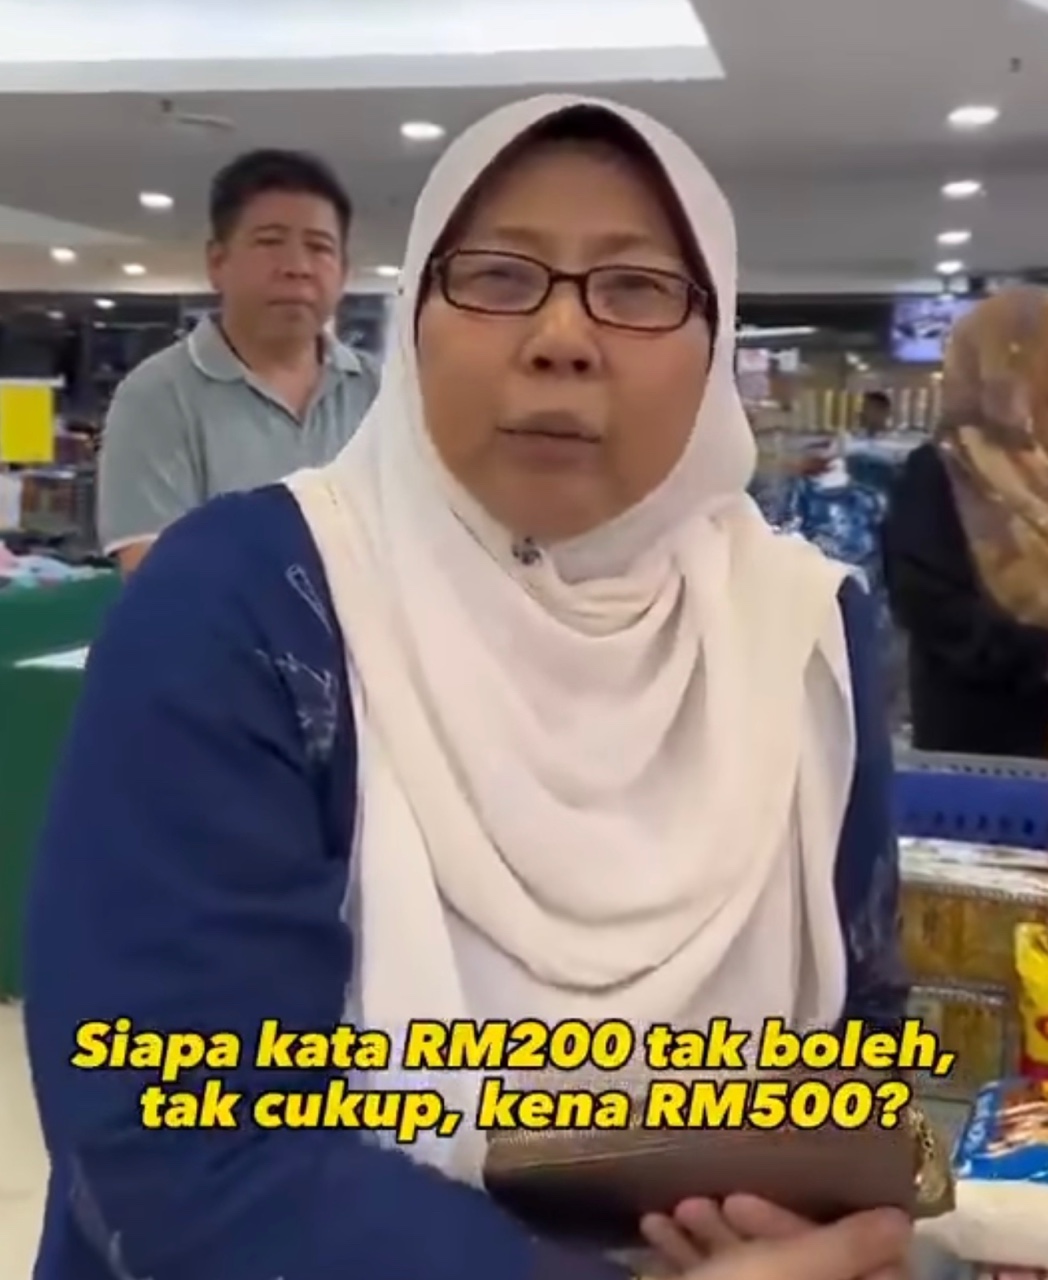 Deputy minister of domestic trade and costs of living fuziah salleh